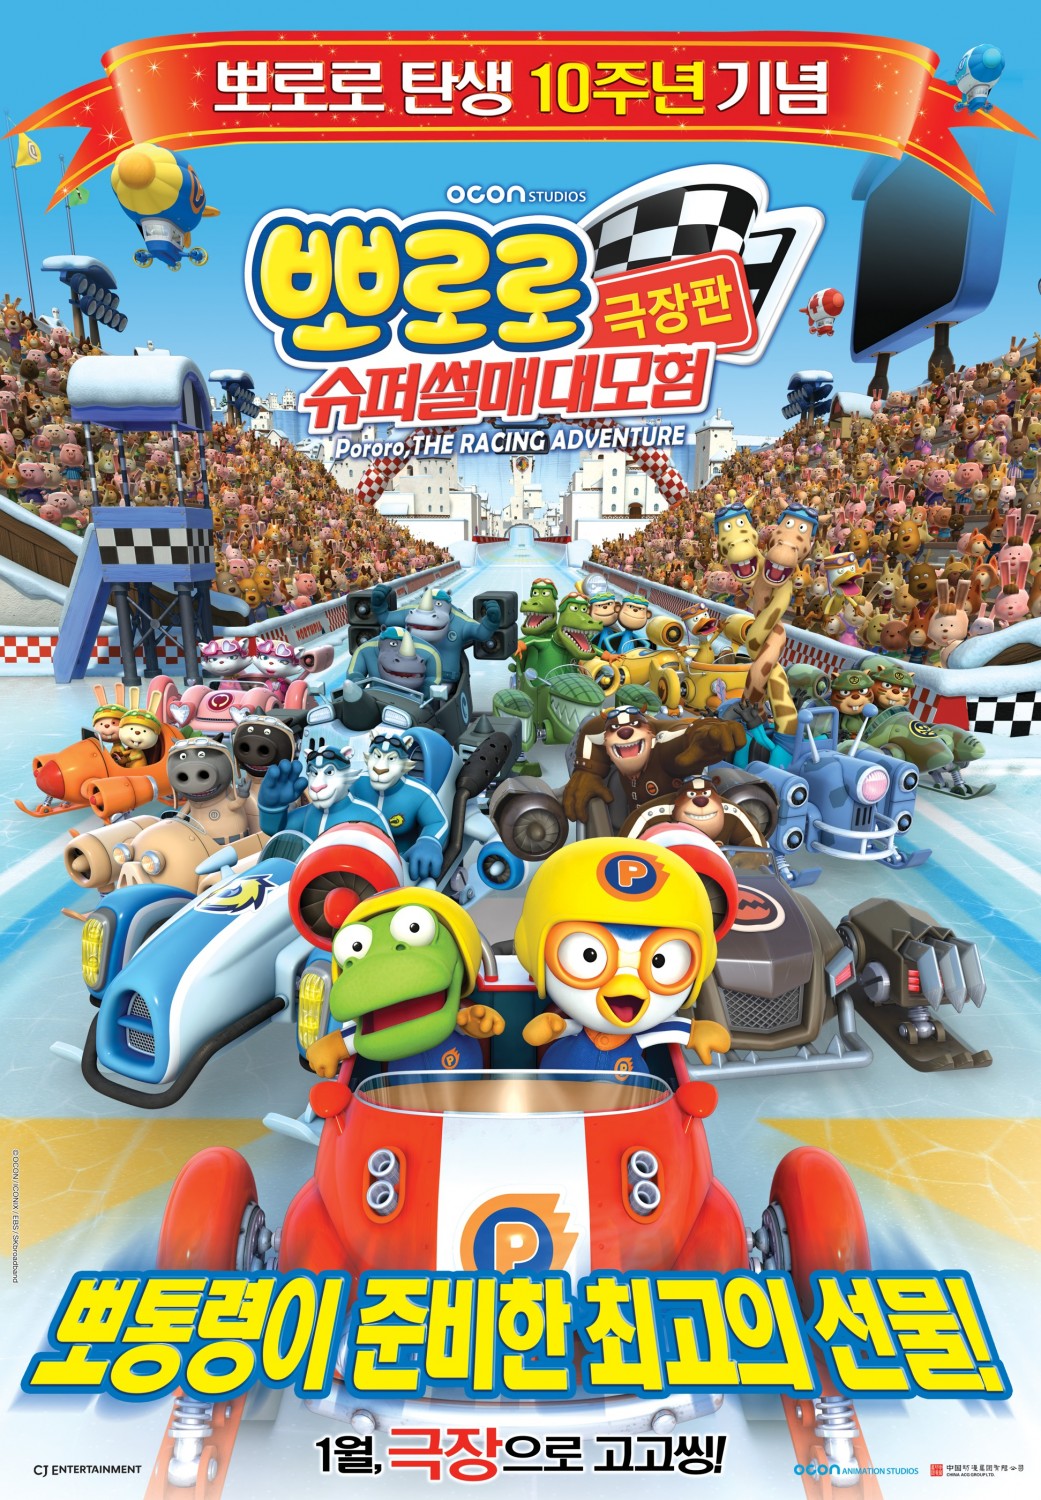 Extra Large Movie Poster Image for Pororo, the Racing Adventure (#2 of 2)